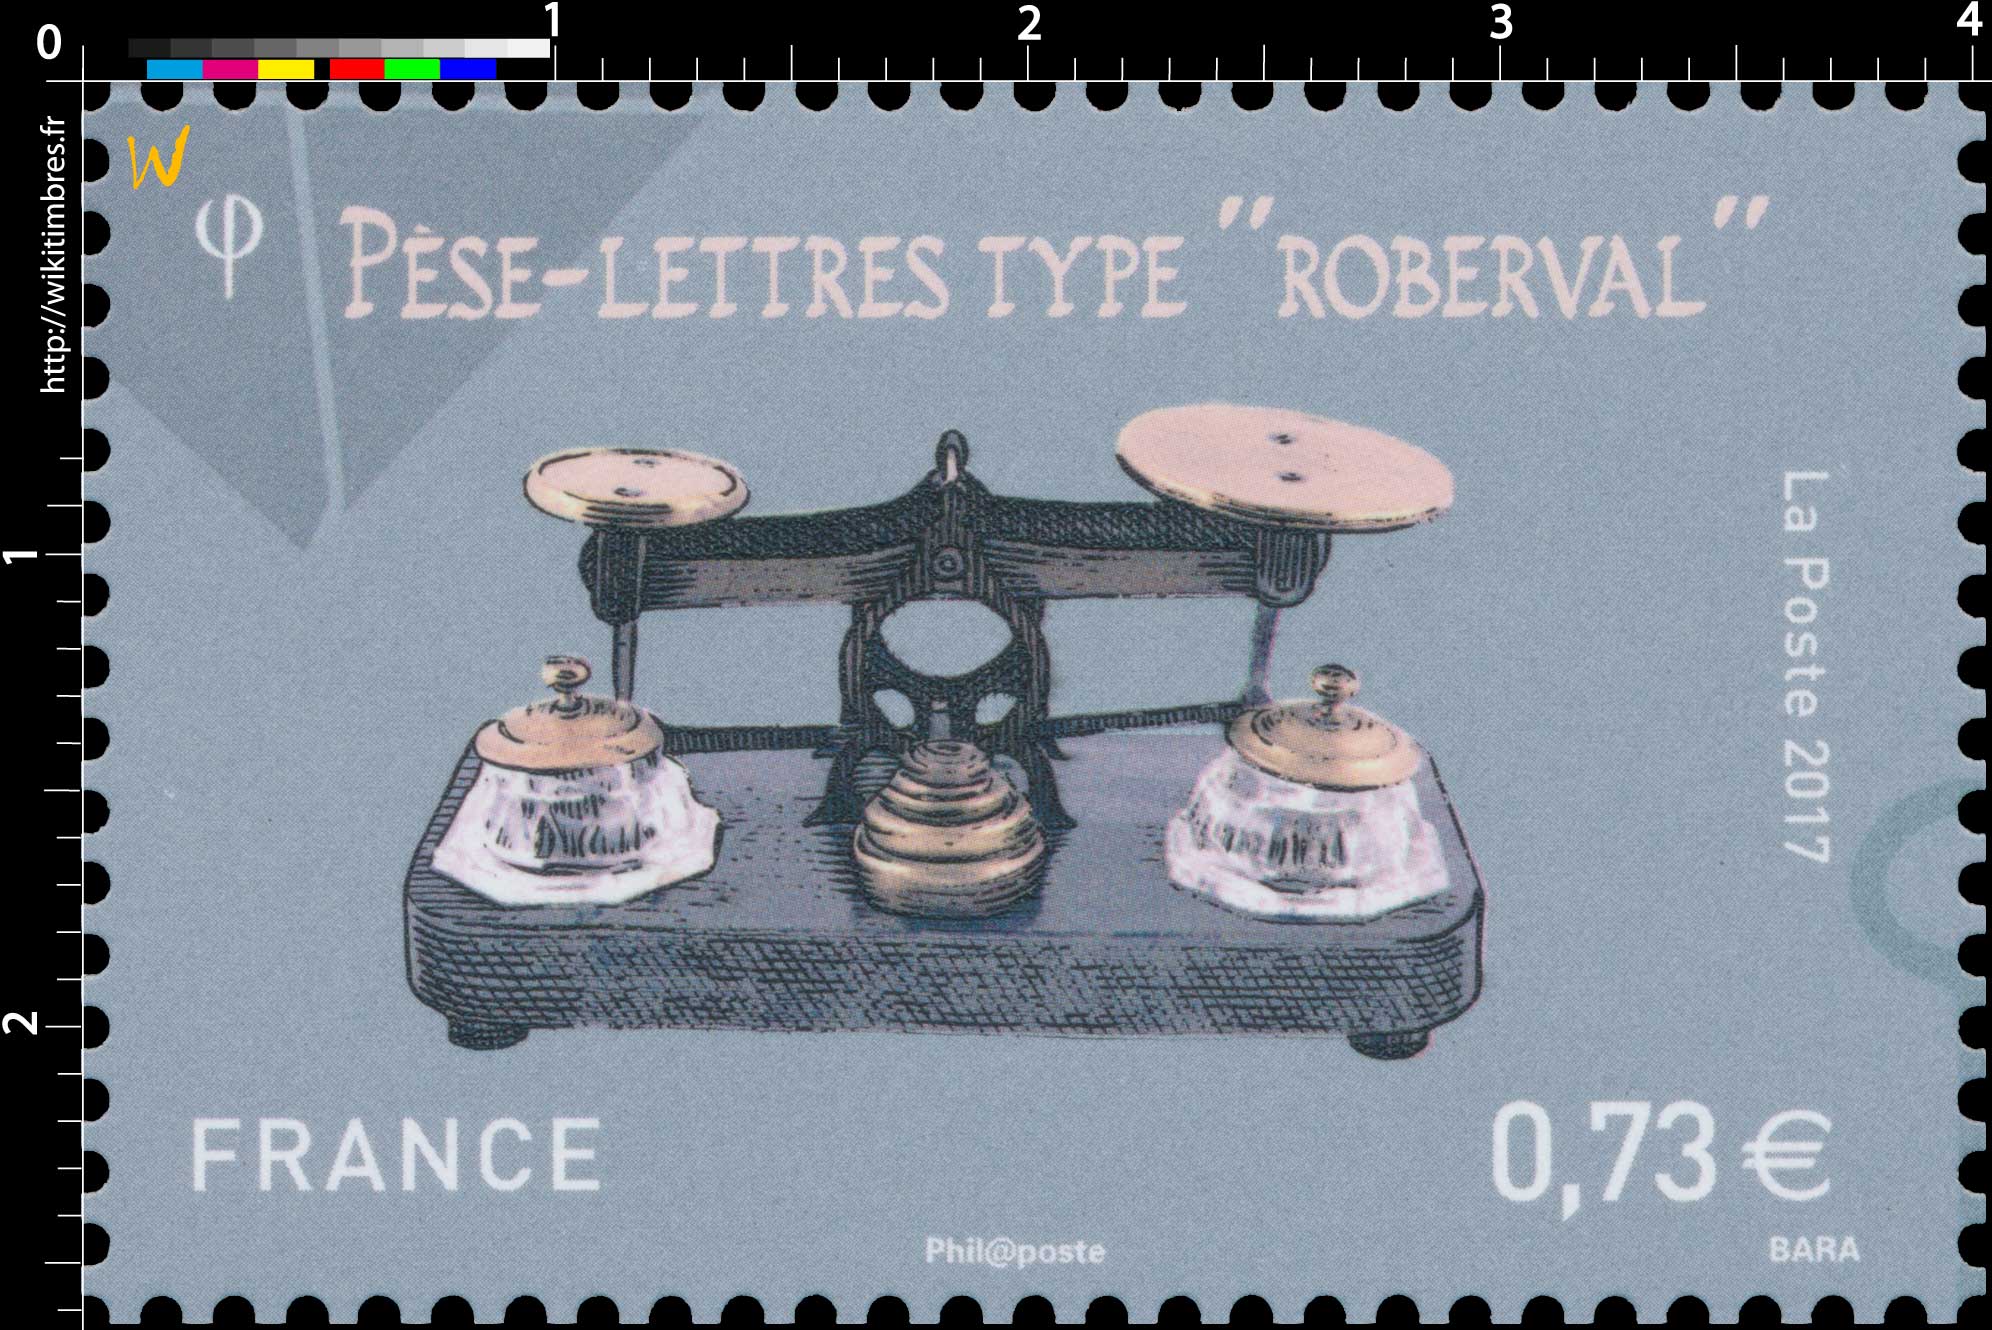 2017 PESE-LETTRE TYPE ROBERVAL